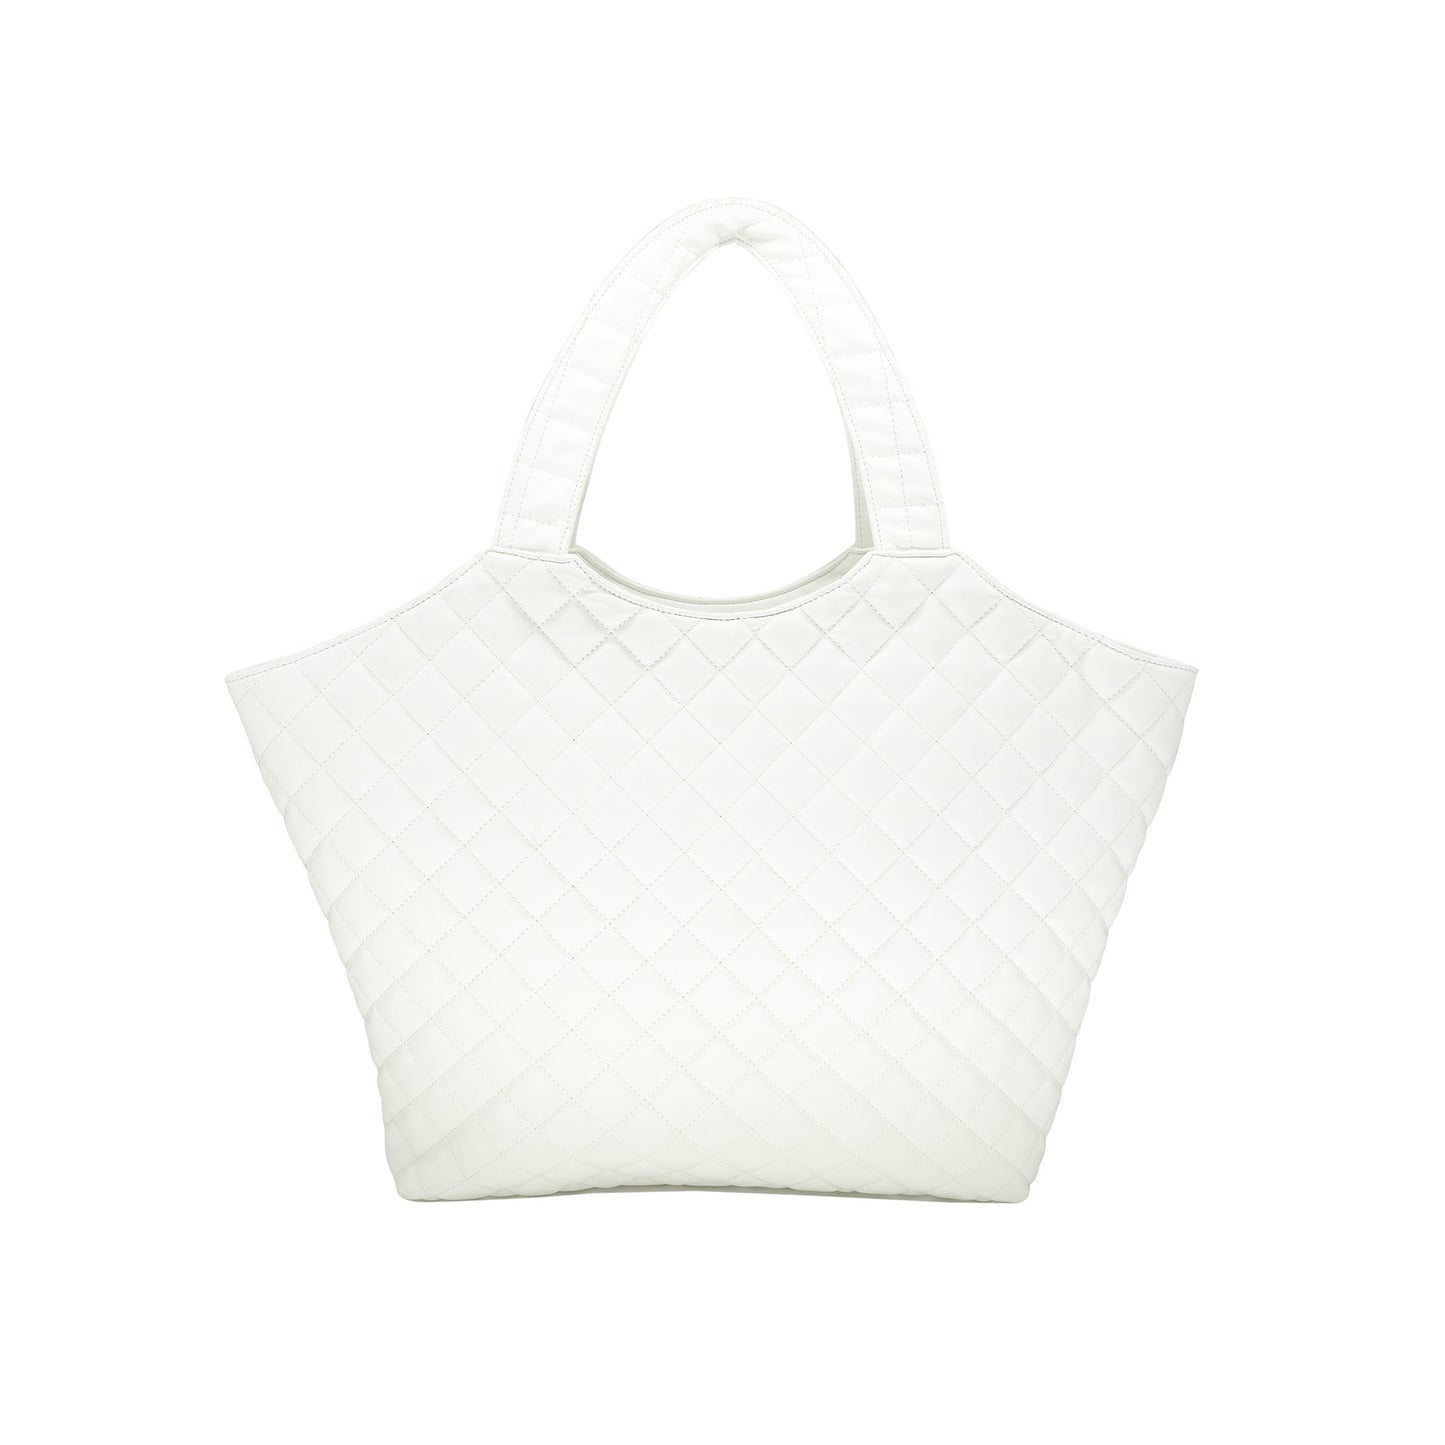 BC Bags Quilted Tote